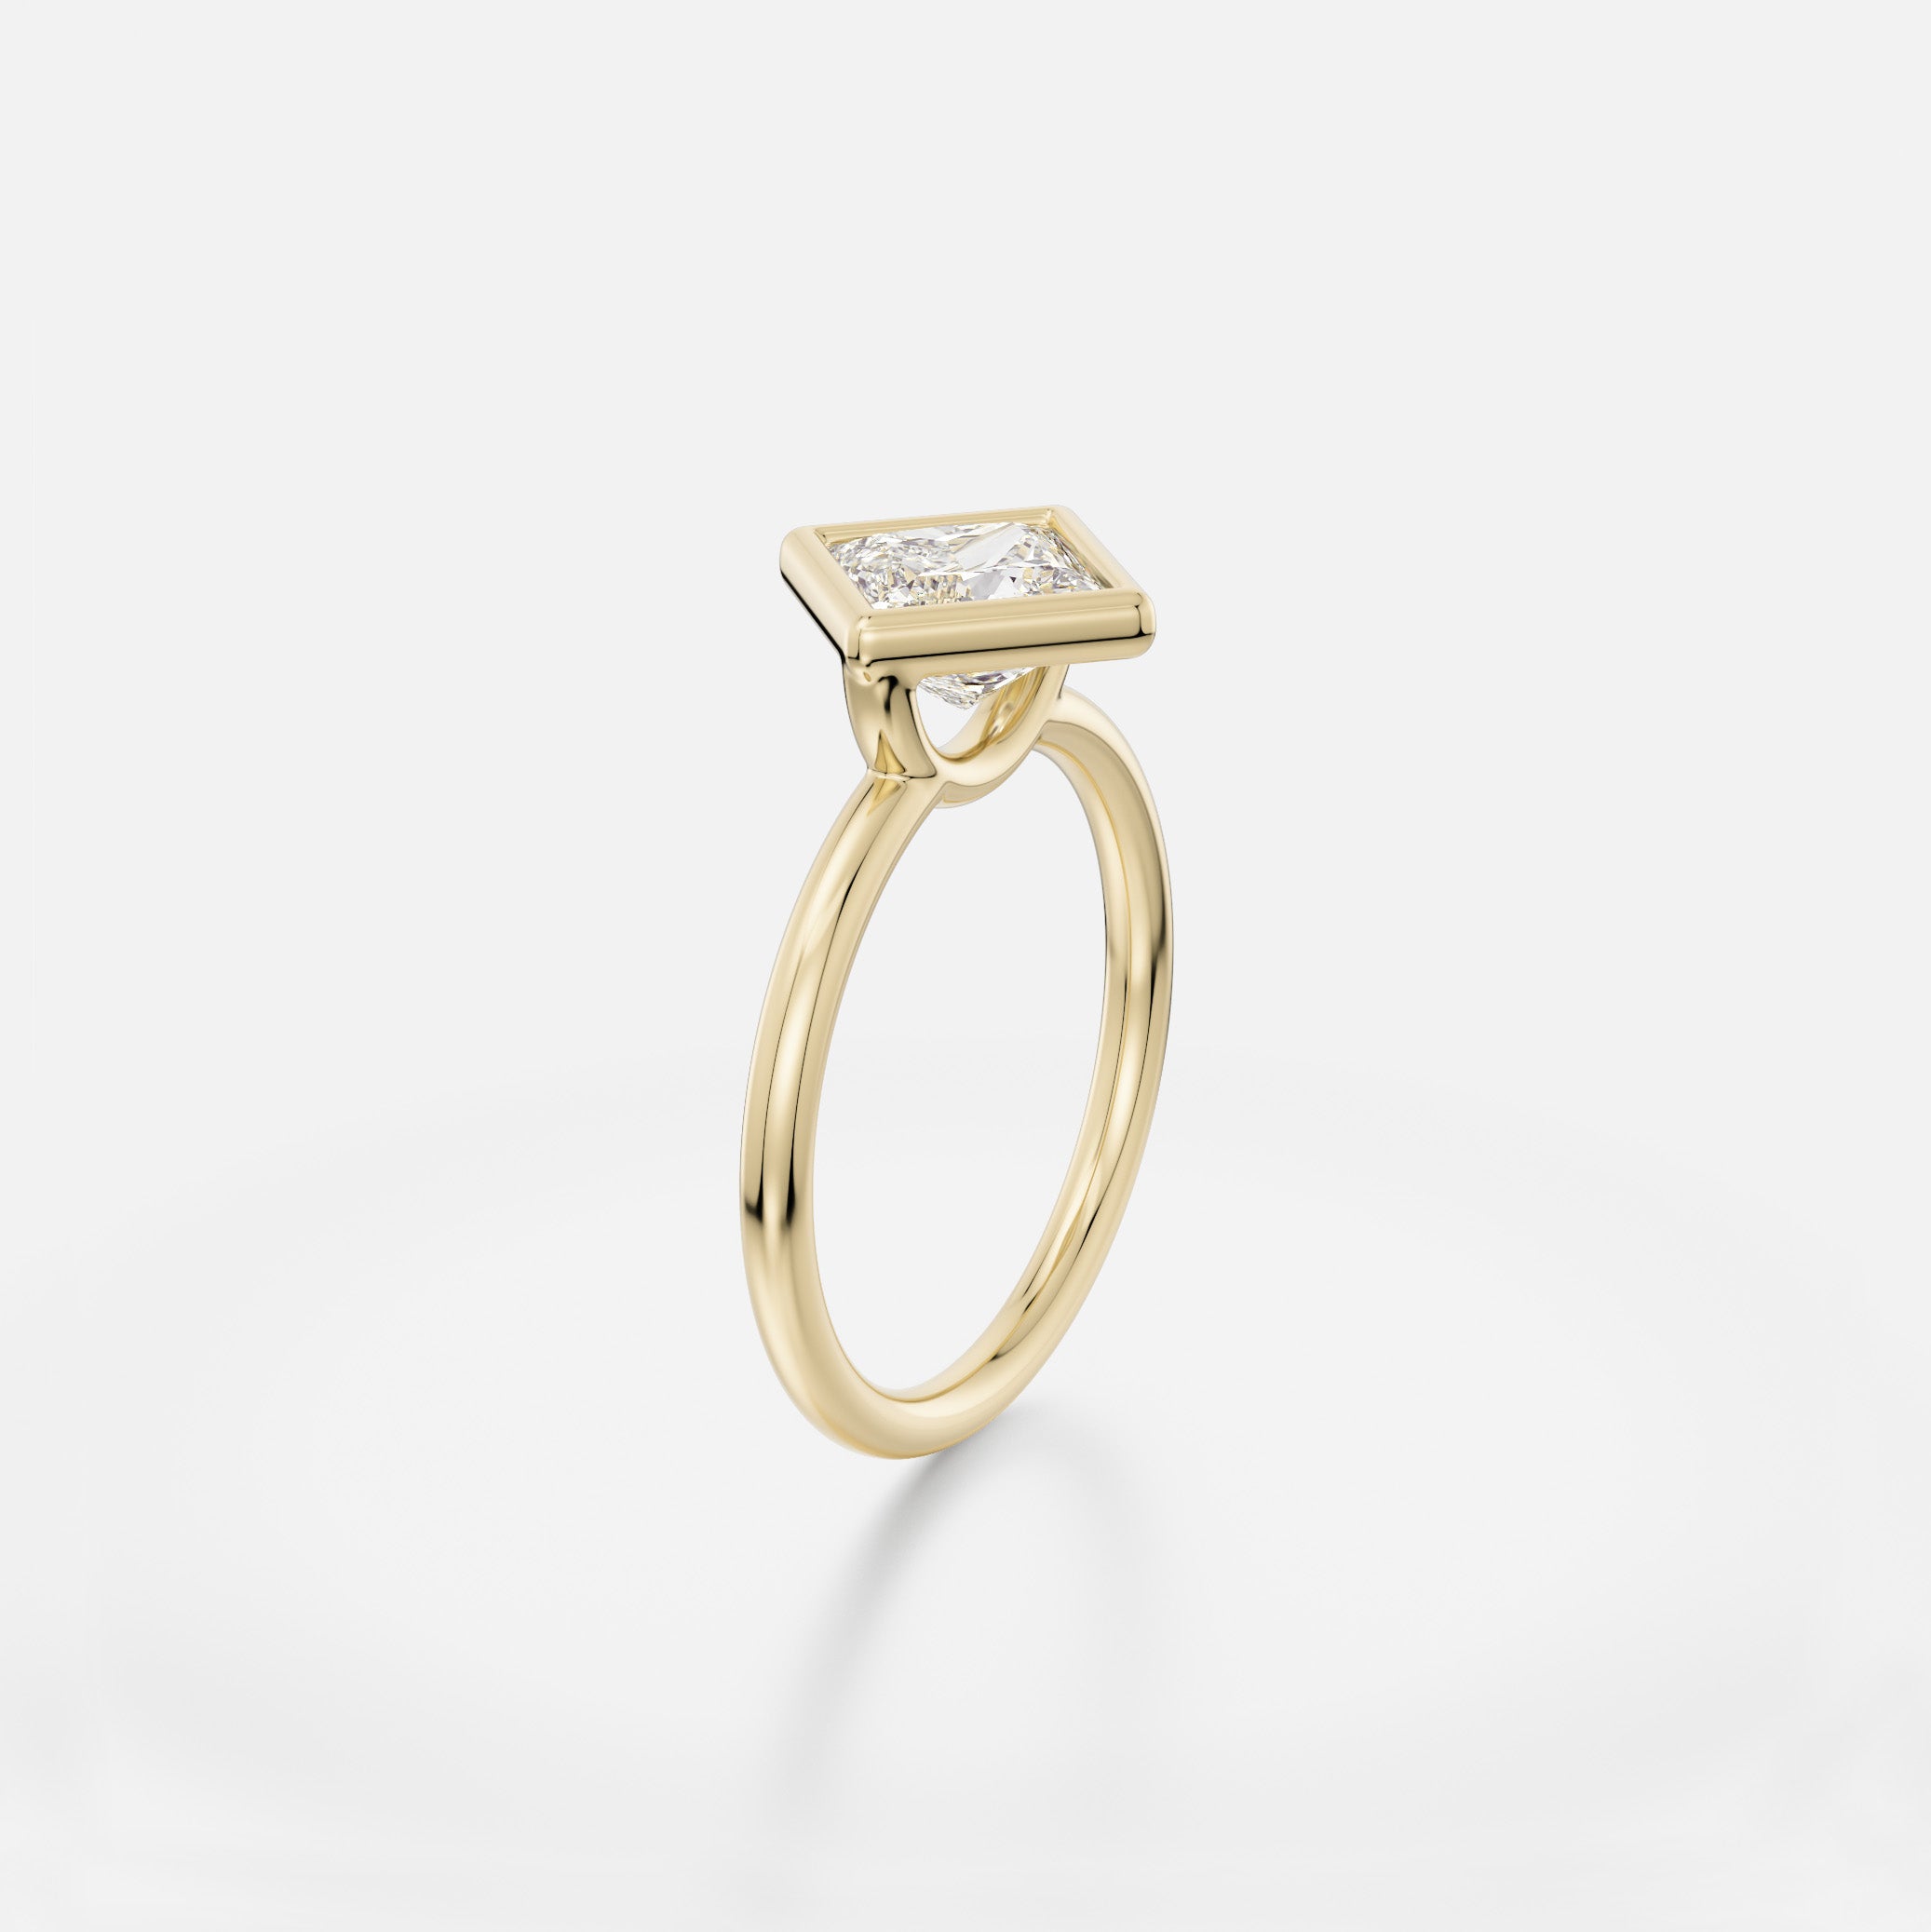 ARTI thin round band with Princess  Cut Profile Bezel Set Unique Diamond Gemstone  Engagement Ring Setting in recycled 14k Gold or platinum handmade by SHW Fine Jewelry NYC